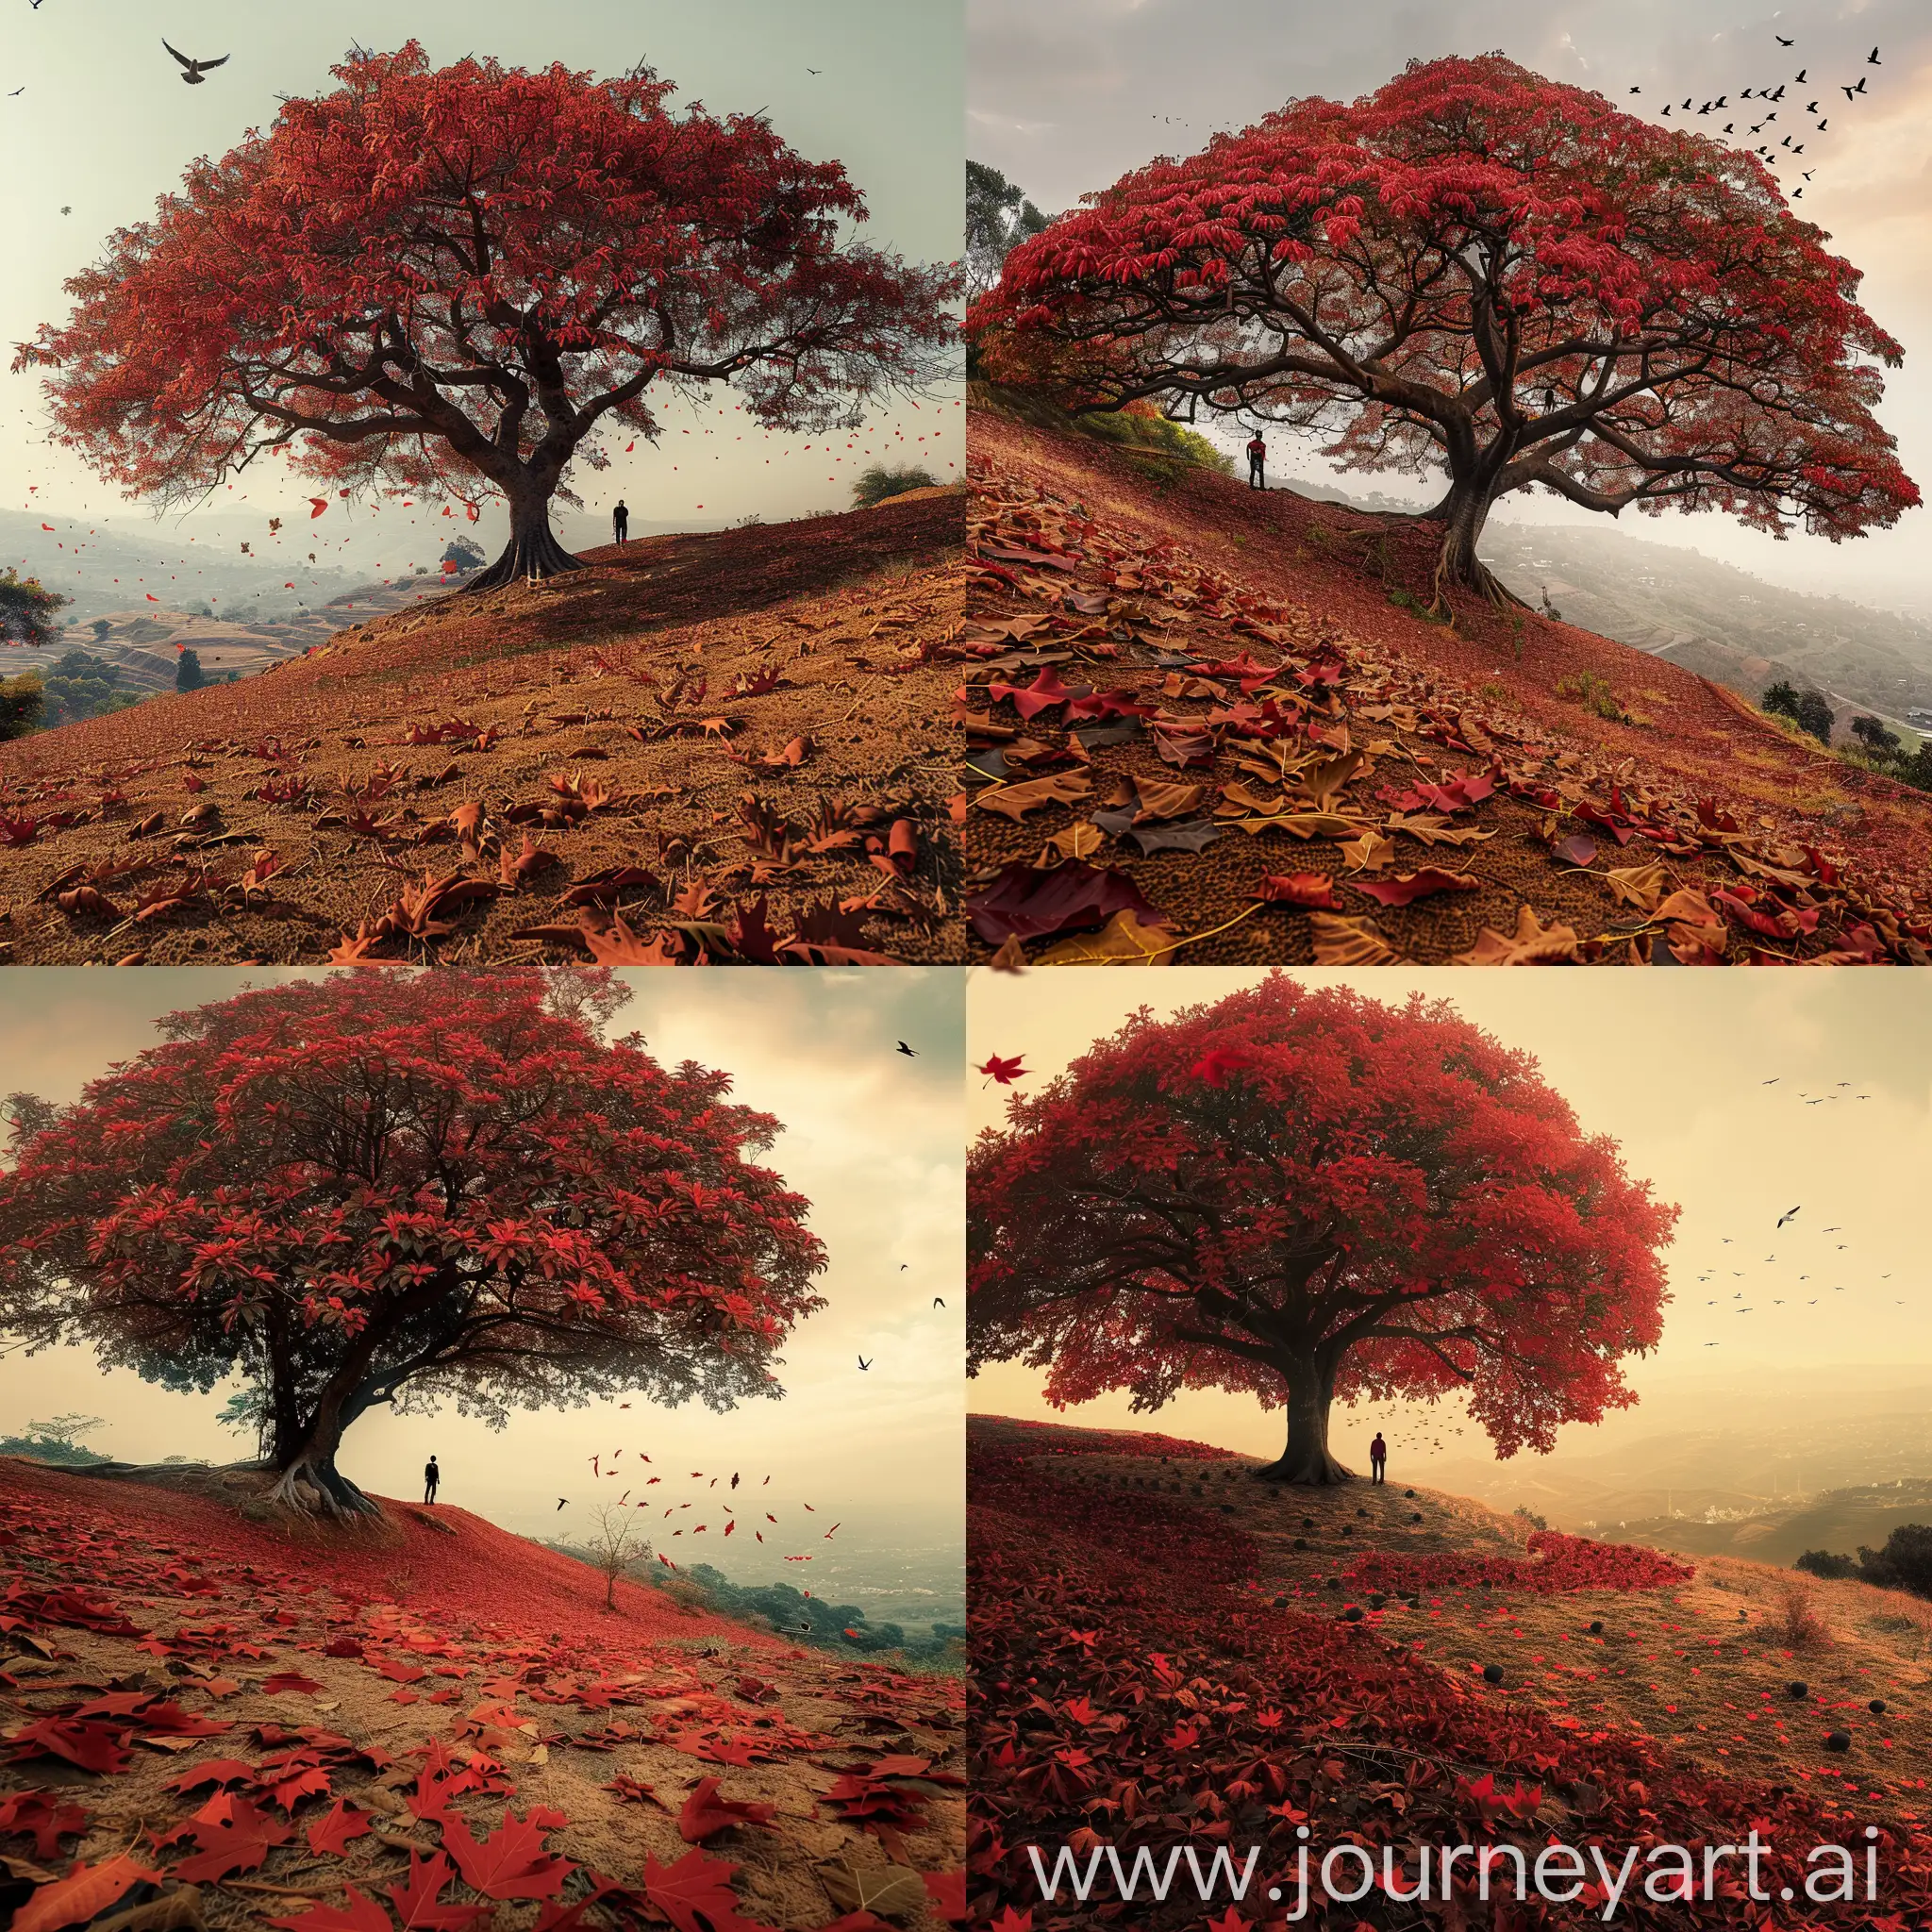 A big tree with red leaves on a hillside, coffee coloured hillside with a lot of fallen leaves, a man standing under a big tree, distant view, birds flying by in the distance, high definition image quality, masterpiece of photography